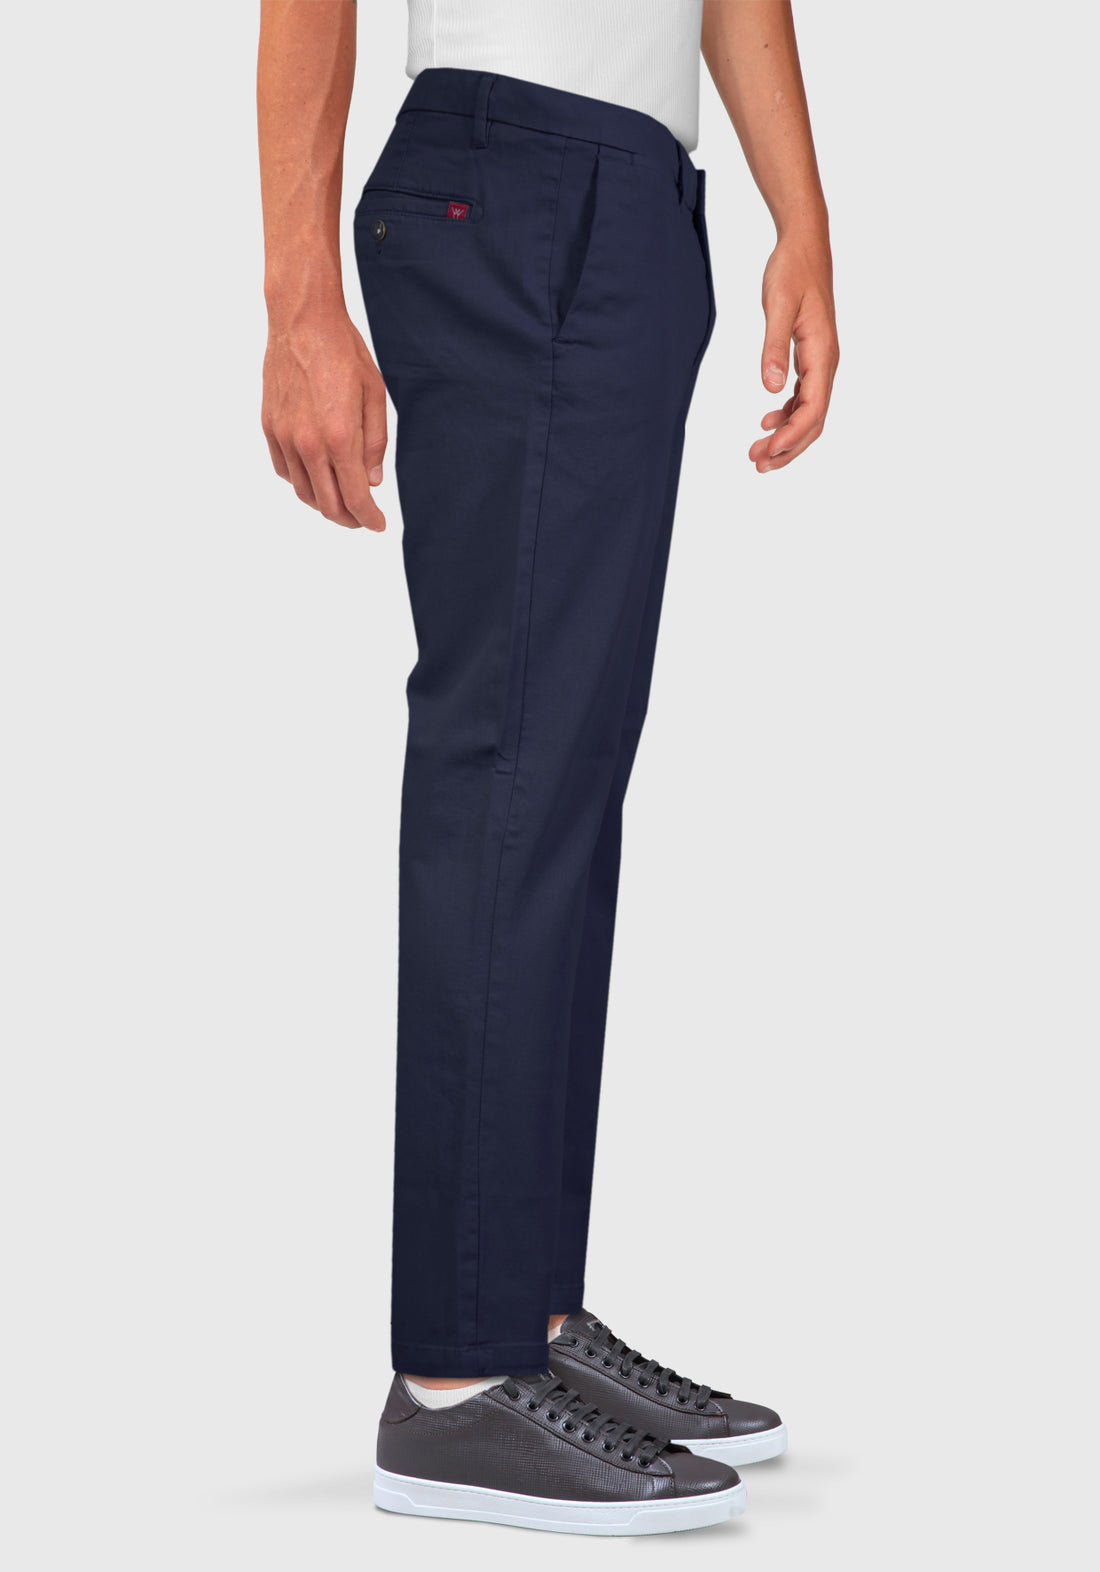 America Pocket Trousers in Warm Woven Cotton - Blue